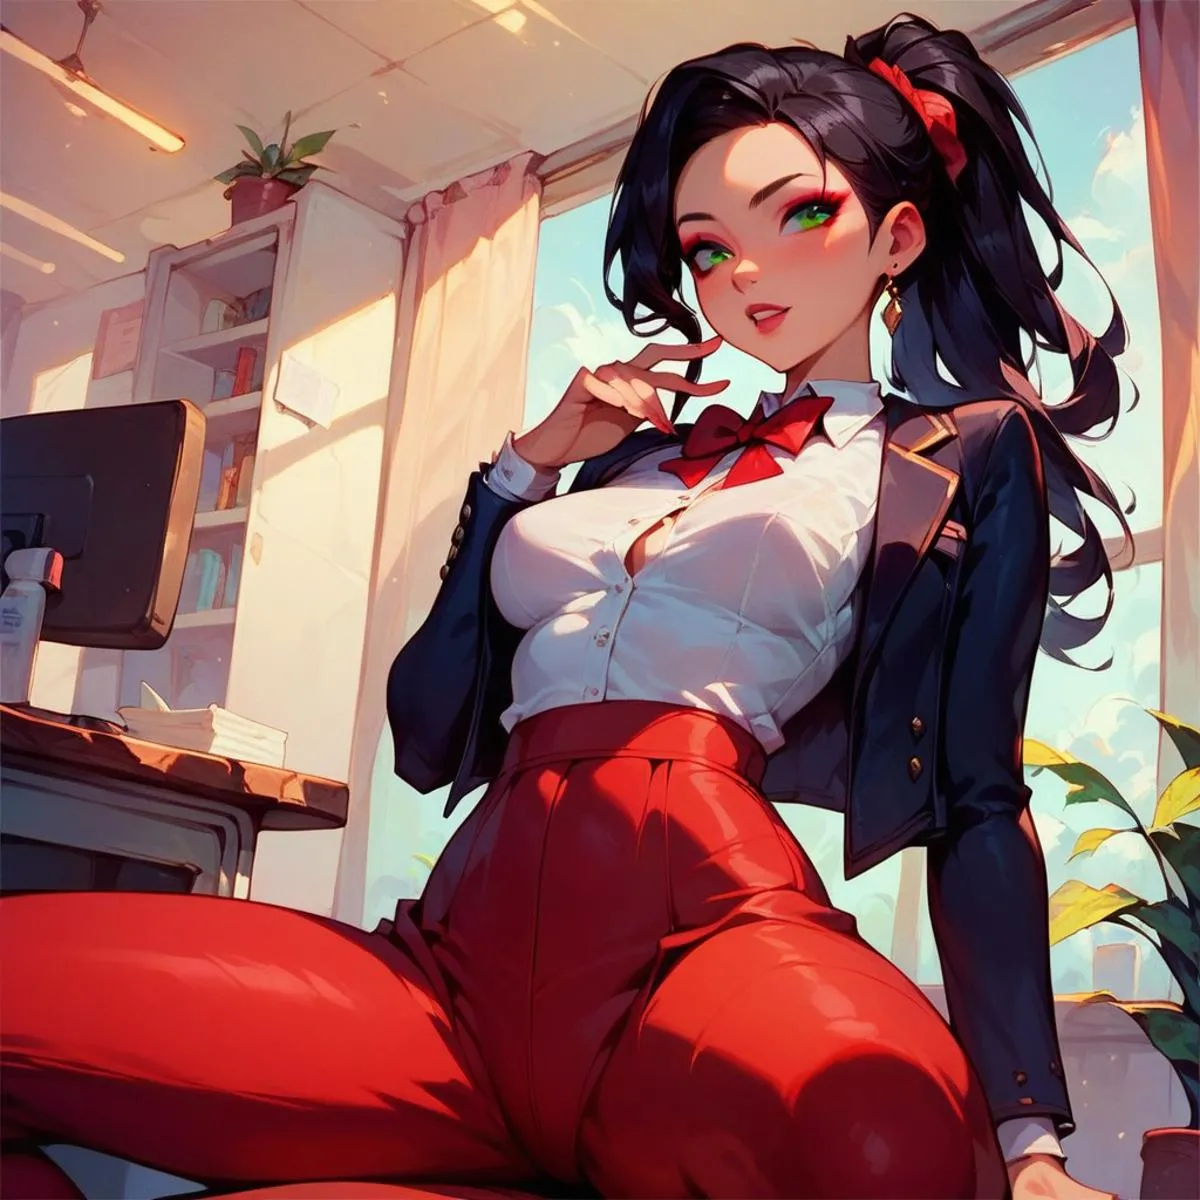 AI generated image using stable diffusion of an anime woman in office attire with red pants, white shirt and black jacket